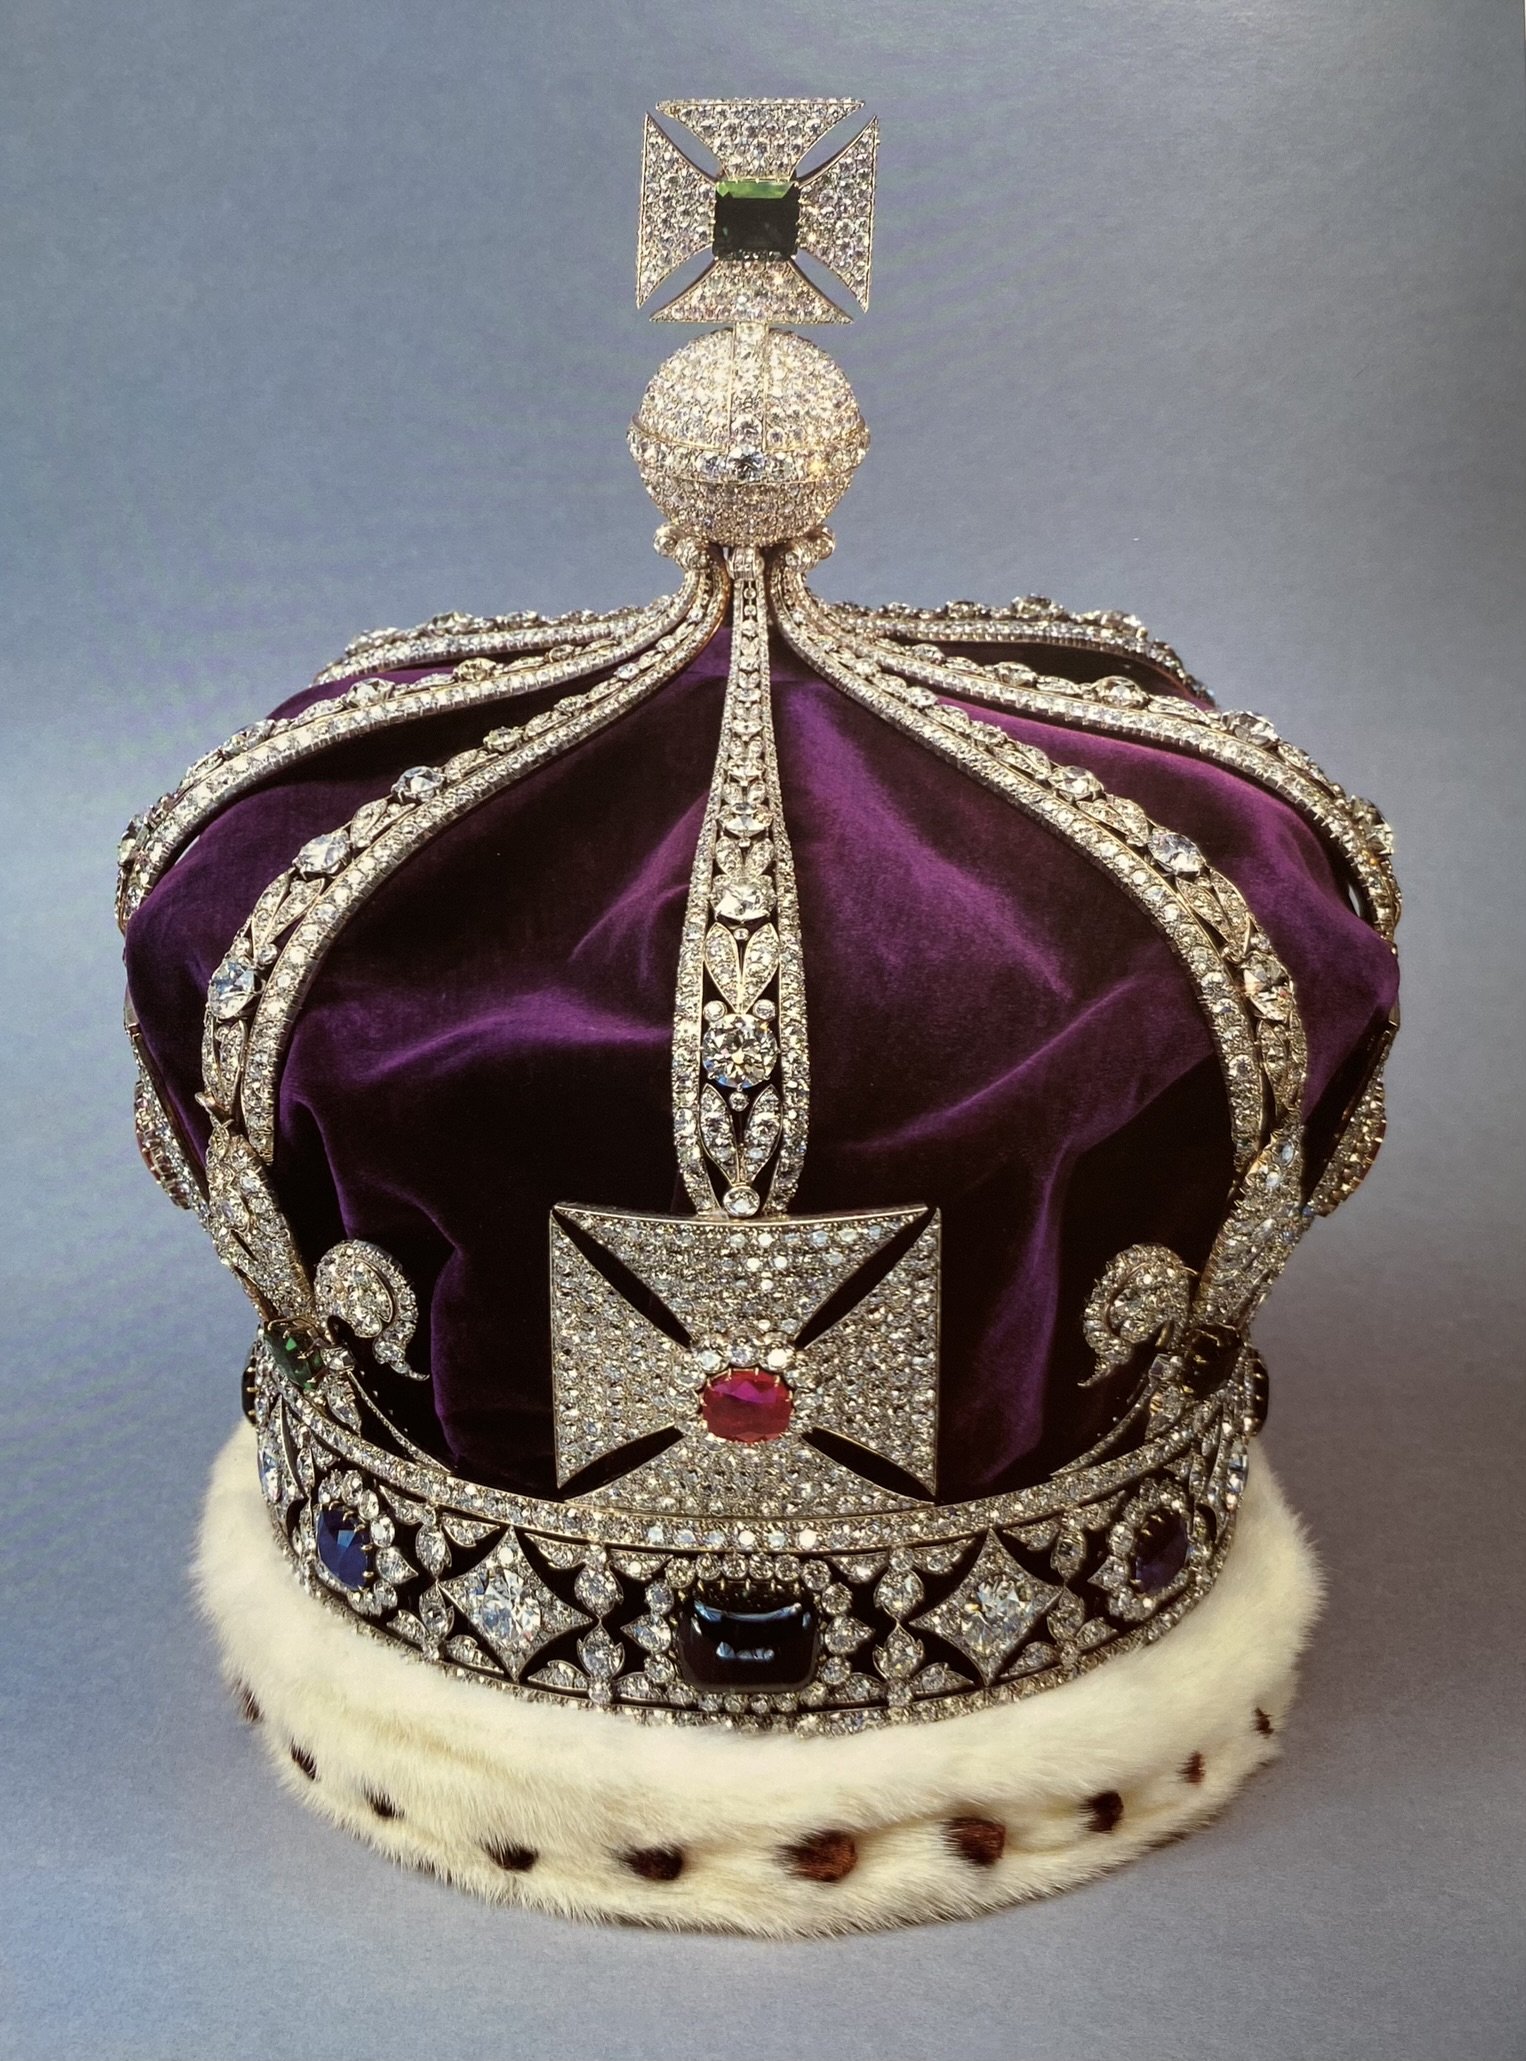 The Imperial Crown of India